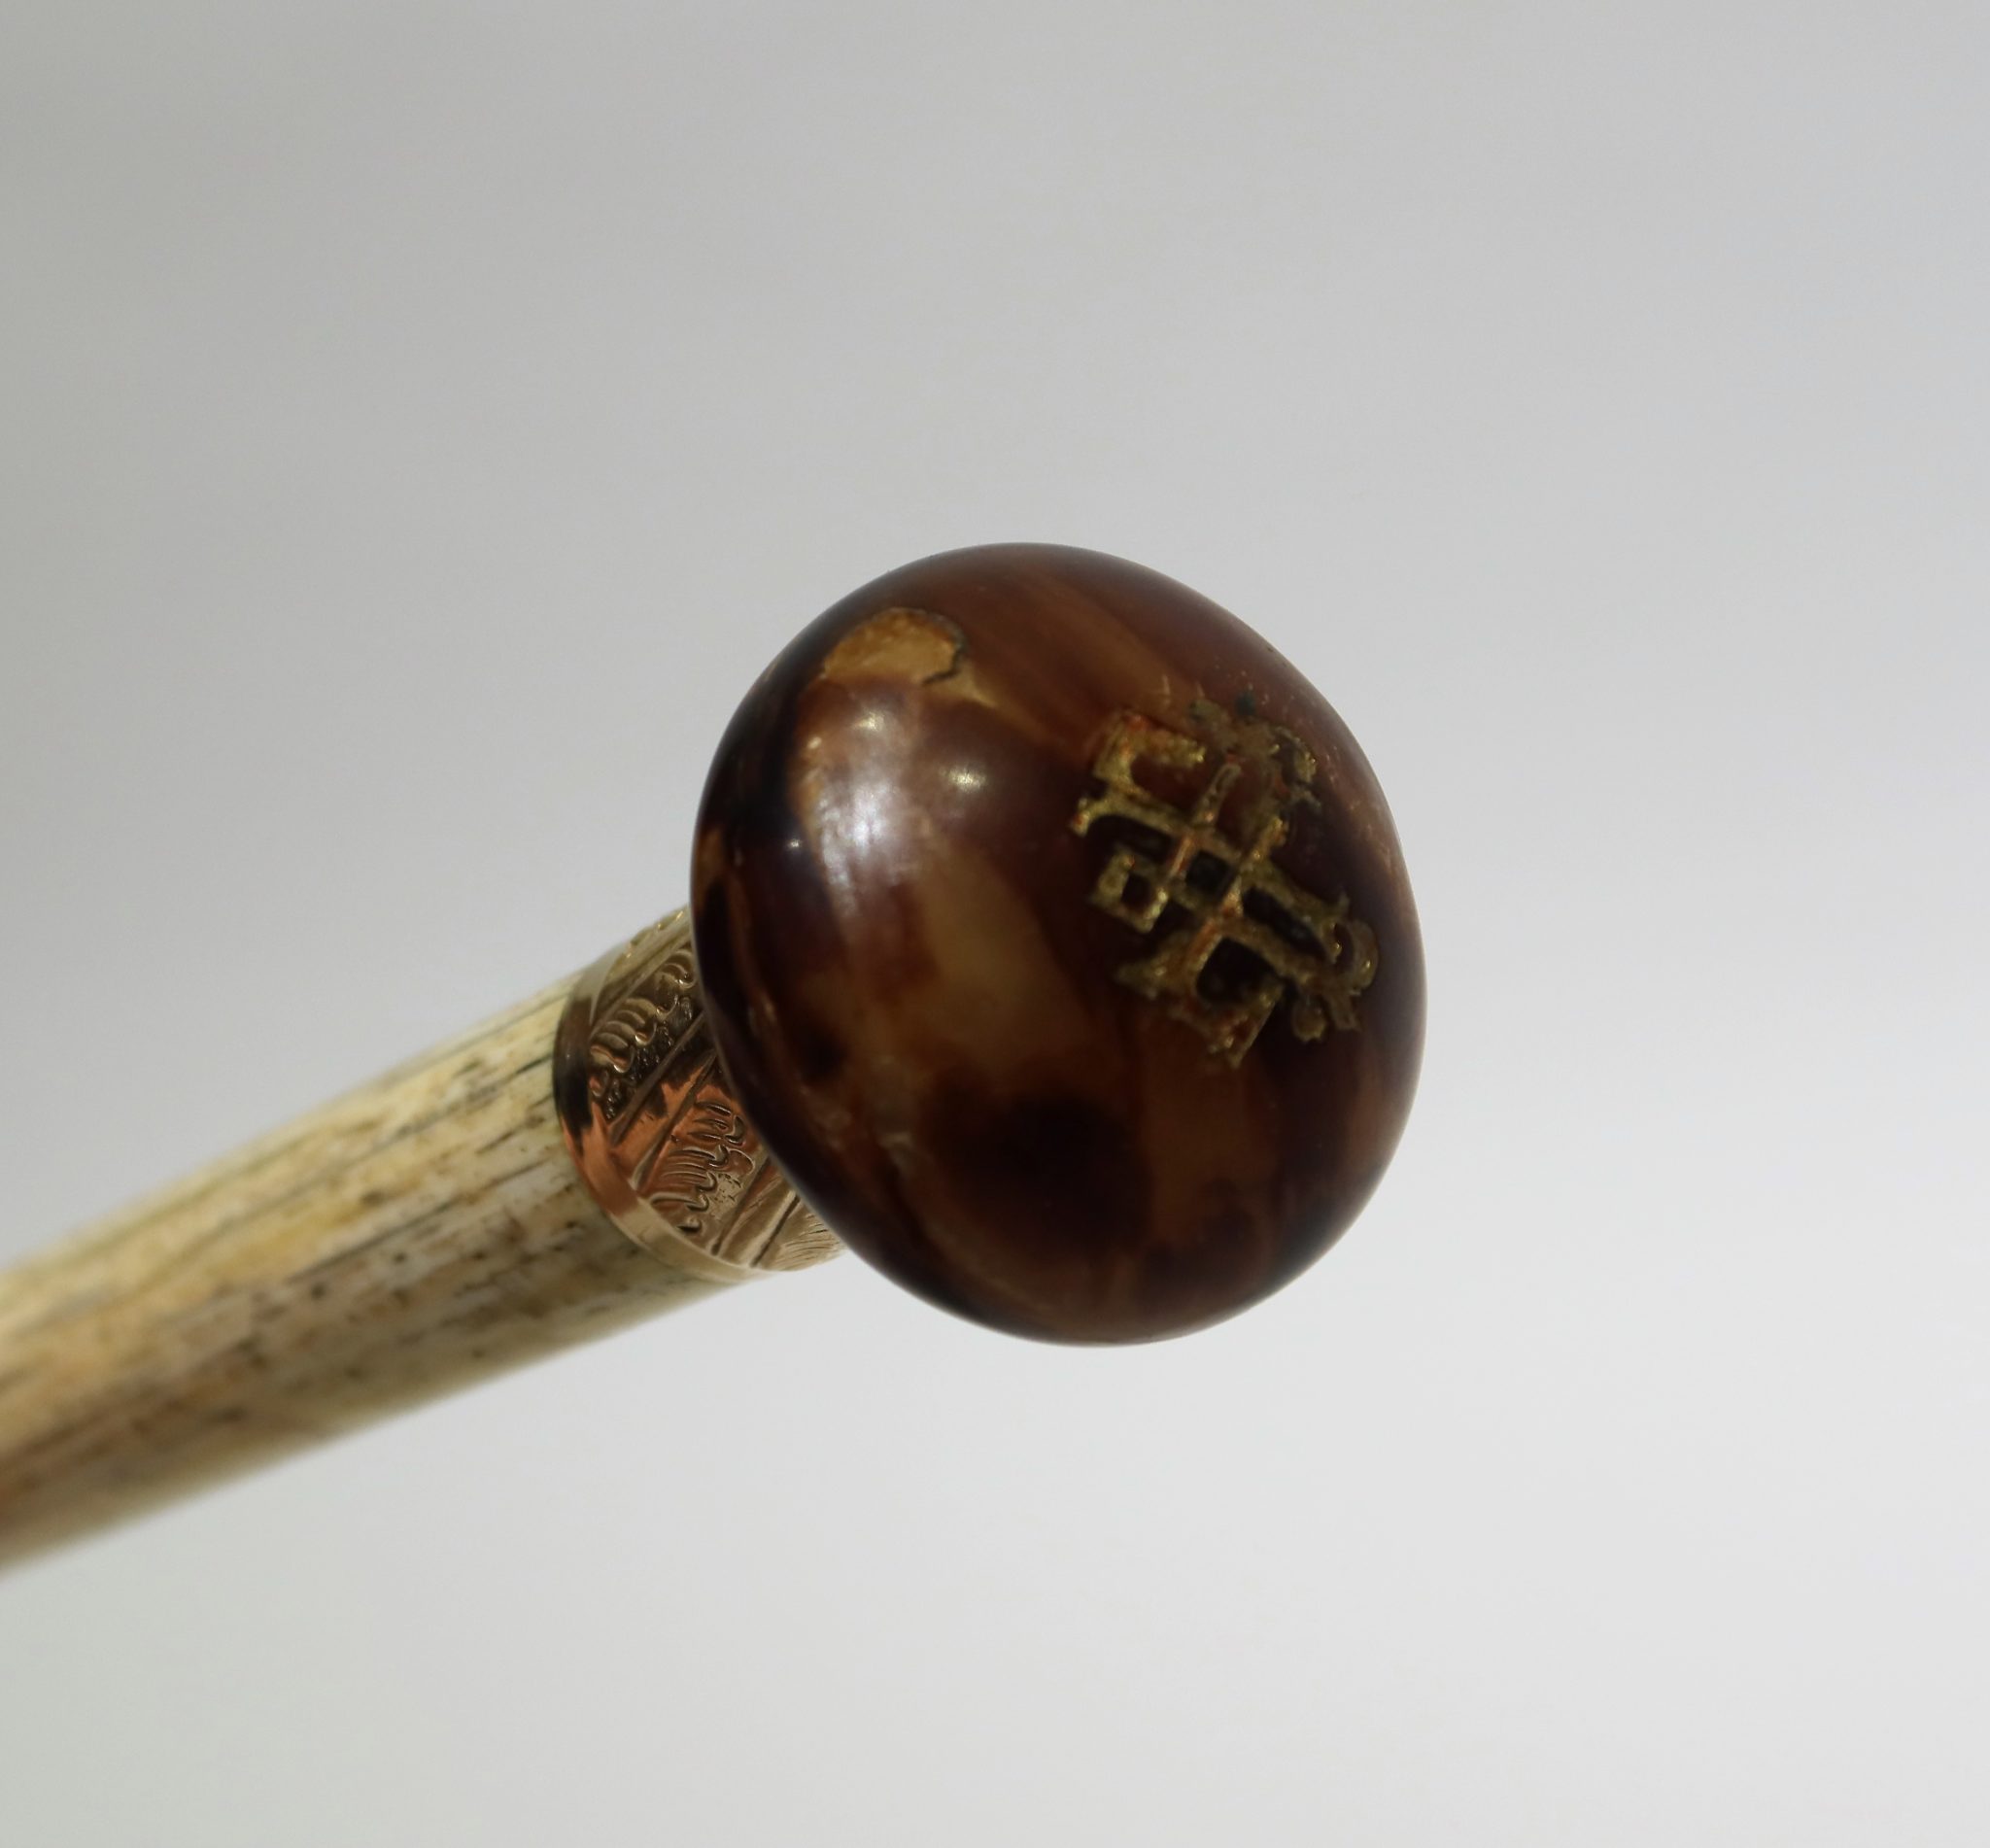 Sailor cane in tortoisebshell and whalebone – 19th Century